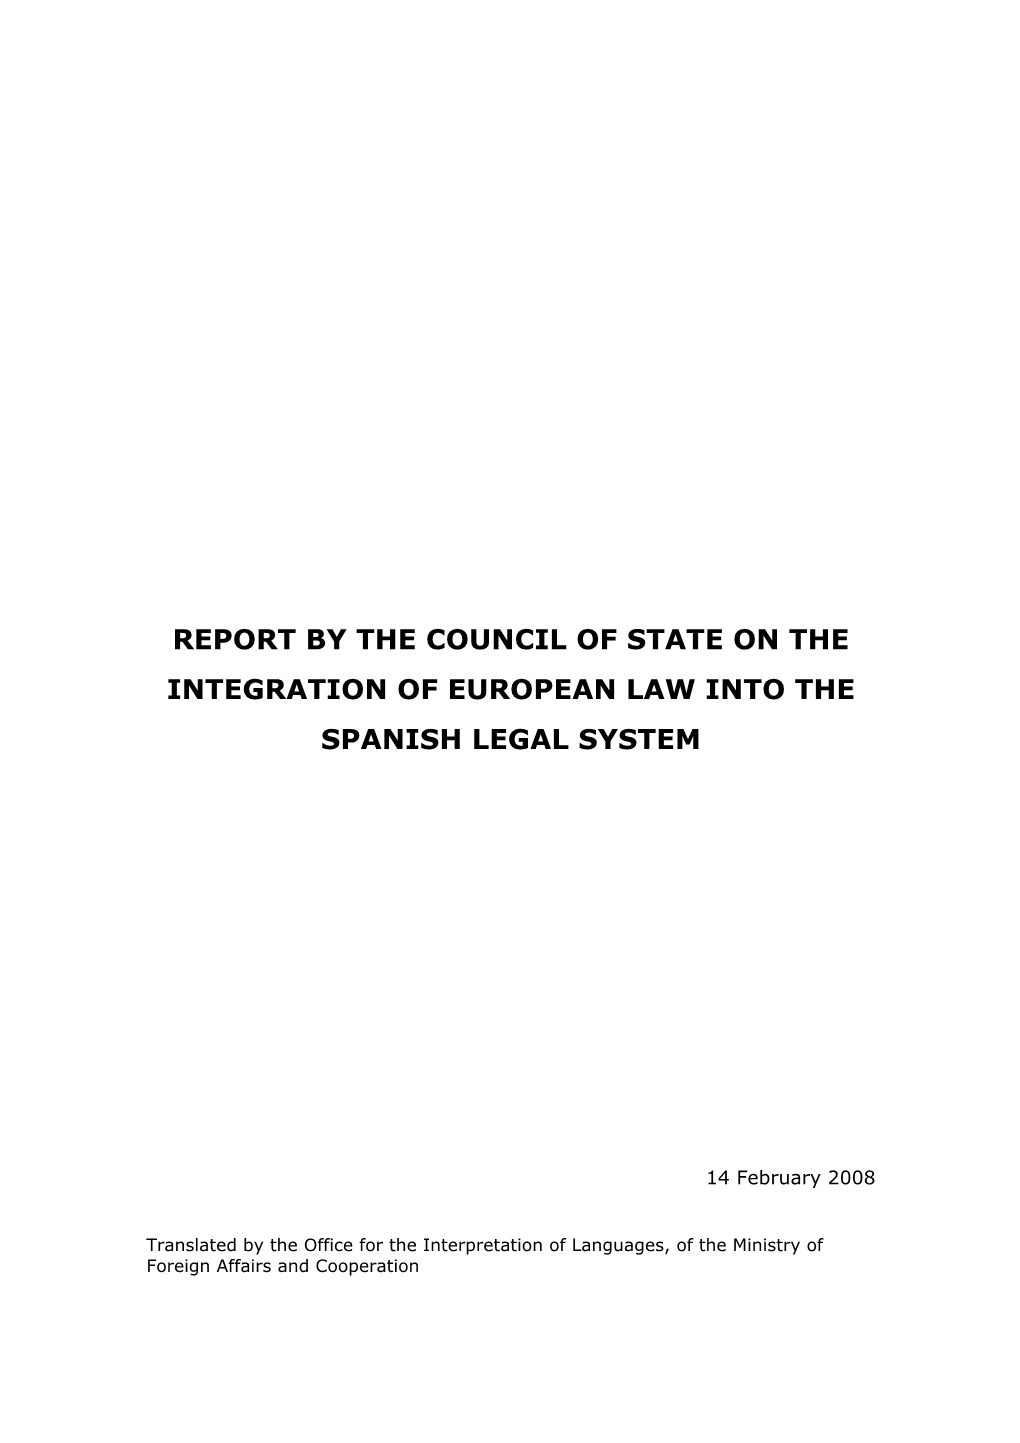 Report by the Council of State on the Integration of European Law Into the Spanish Legal System